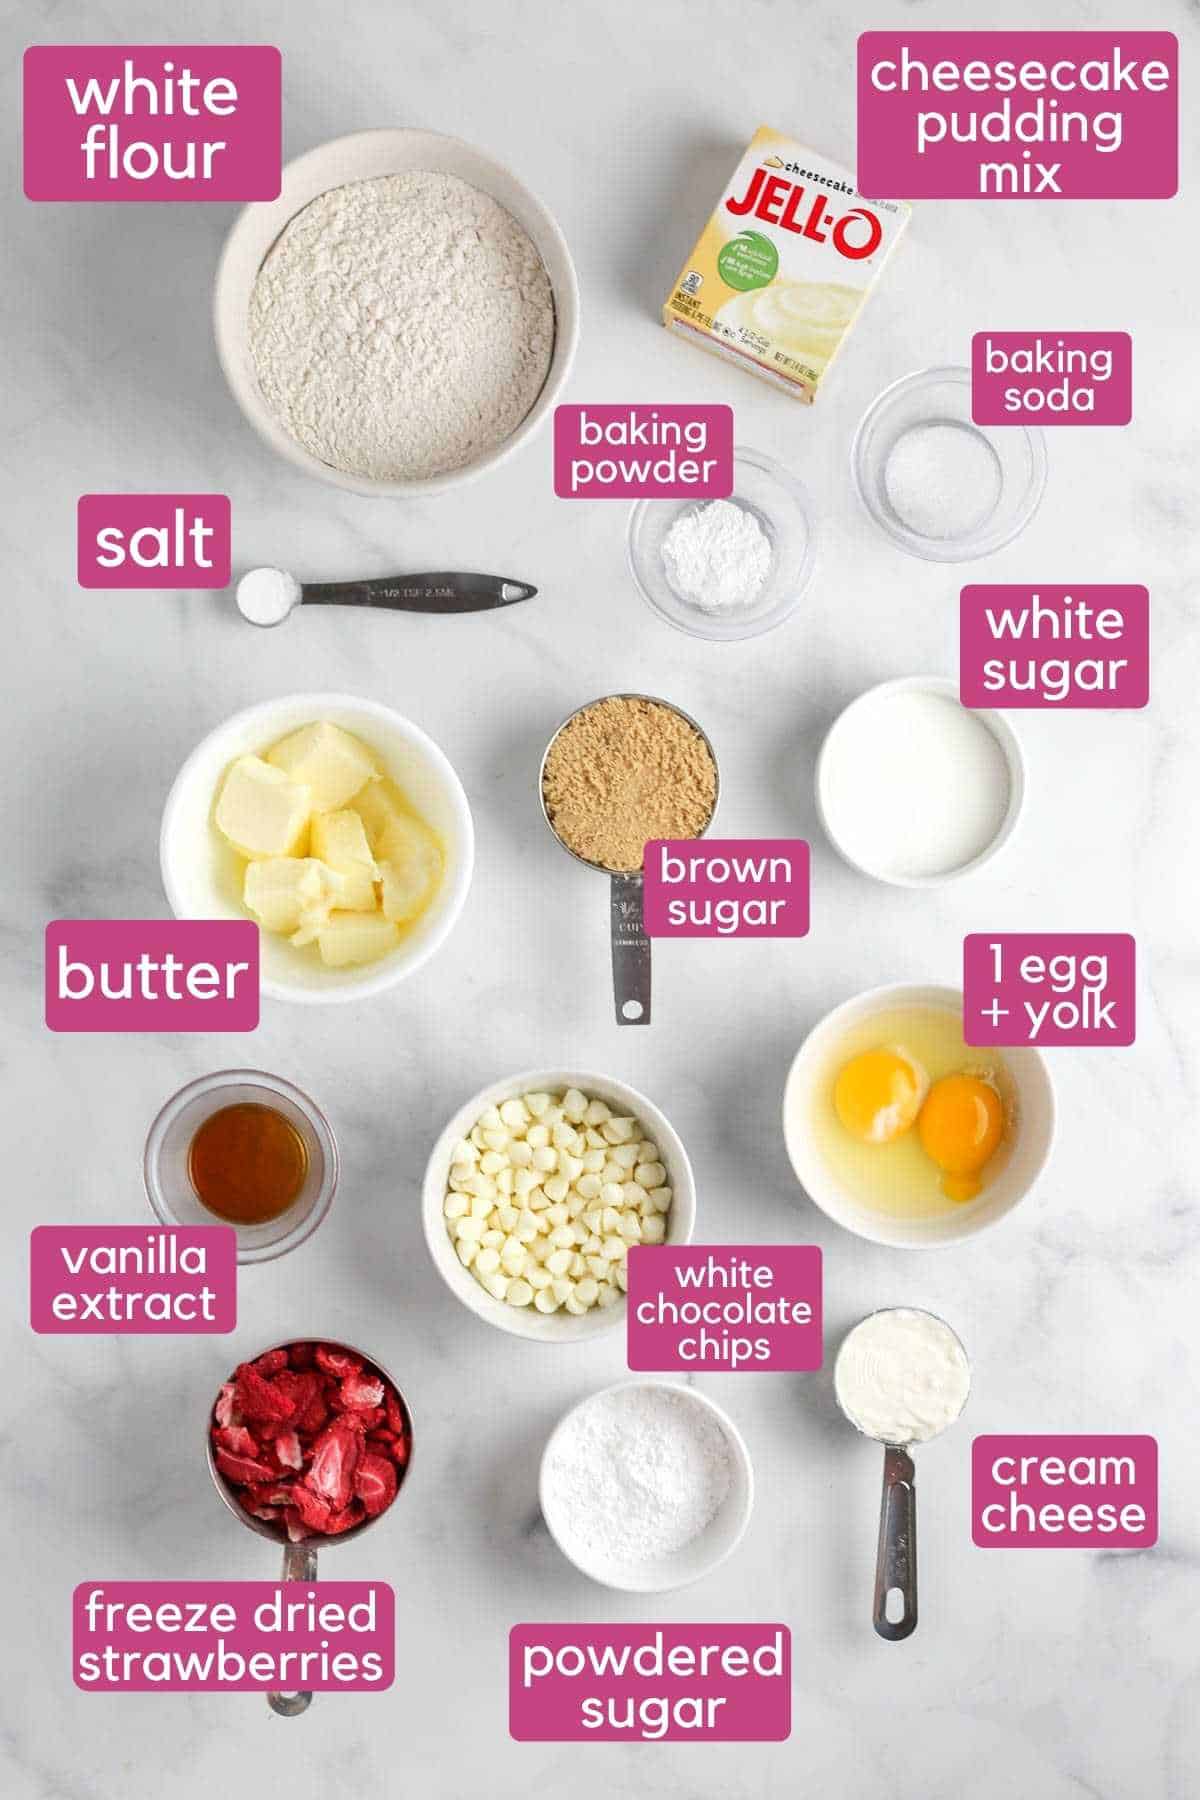 The ingredients needed to make strawberry cheesecake cookies, including strawberries and cream cheese.